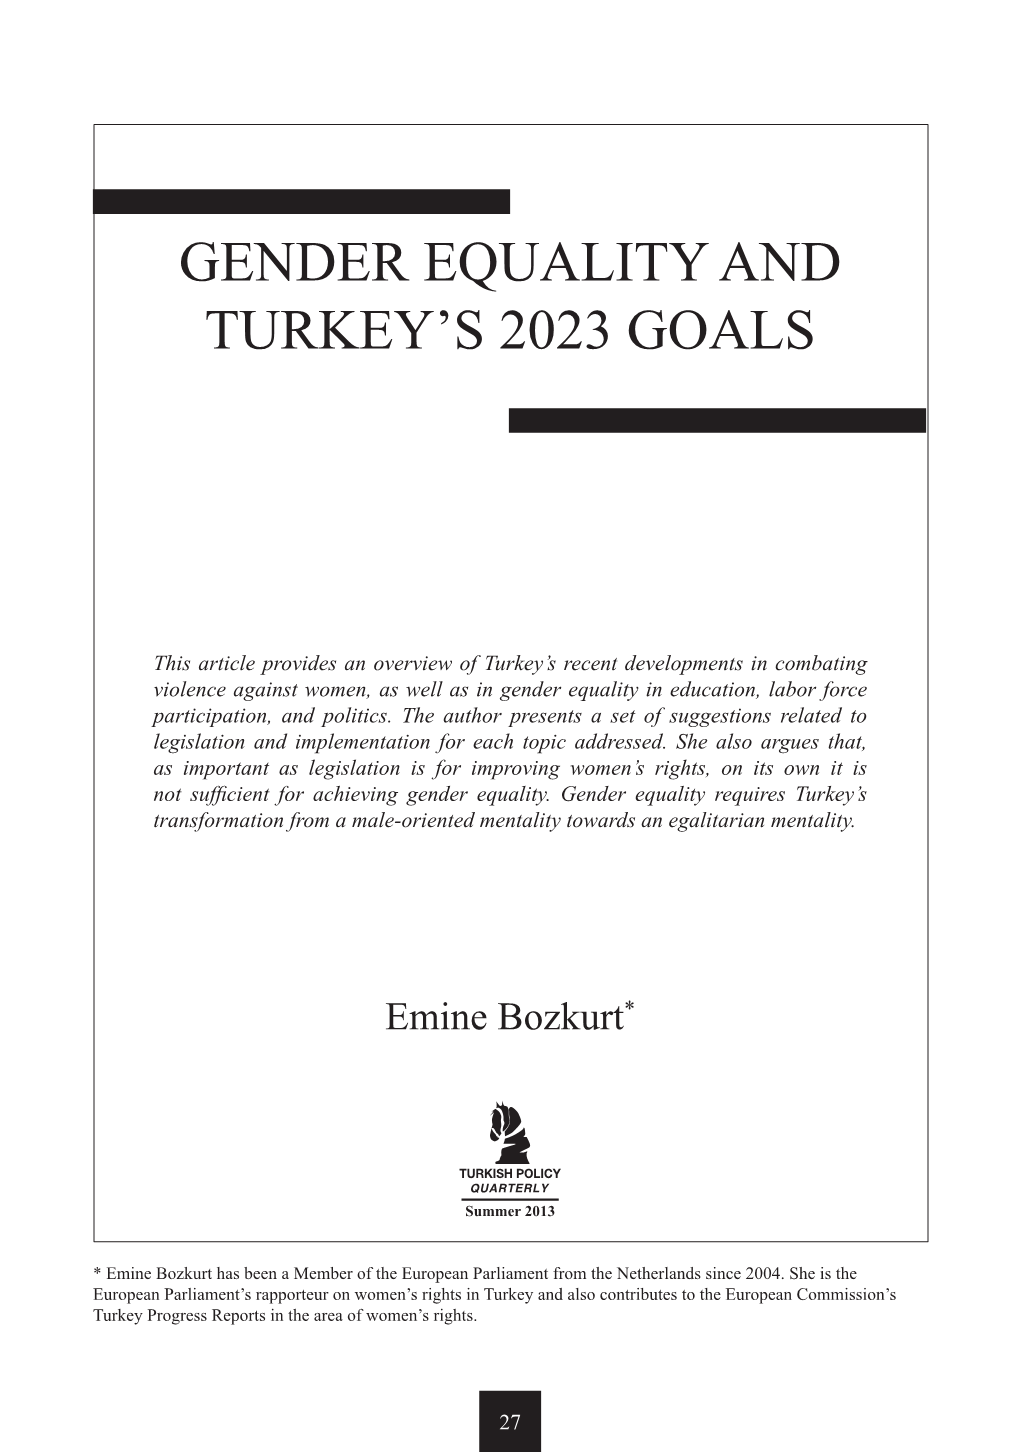 Gender Equality and Turkey's 2023 Goals